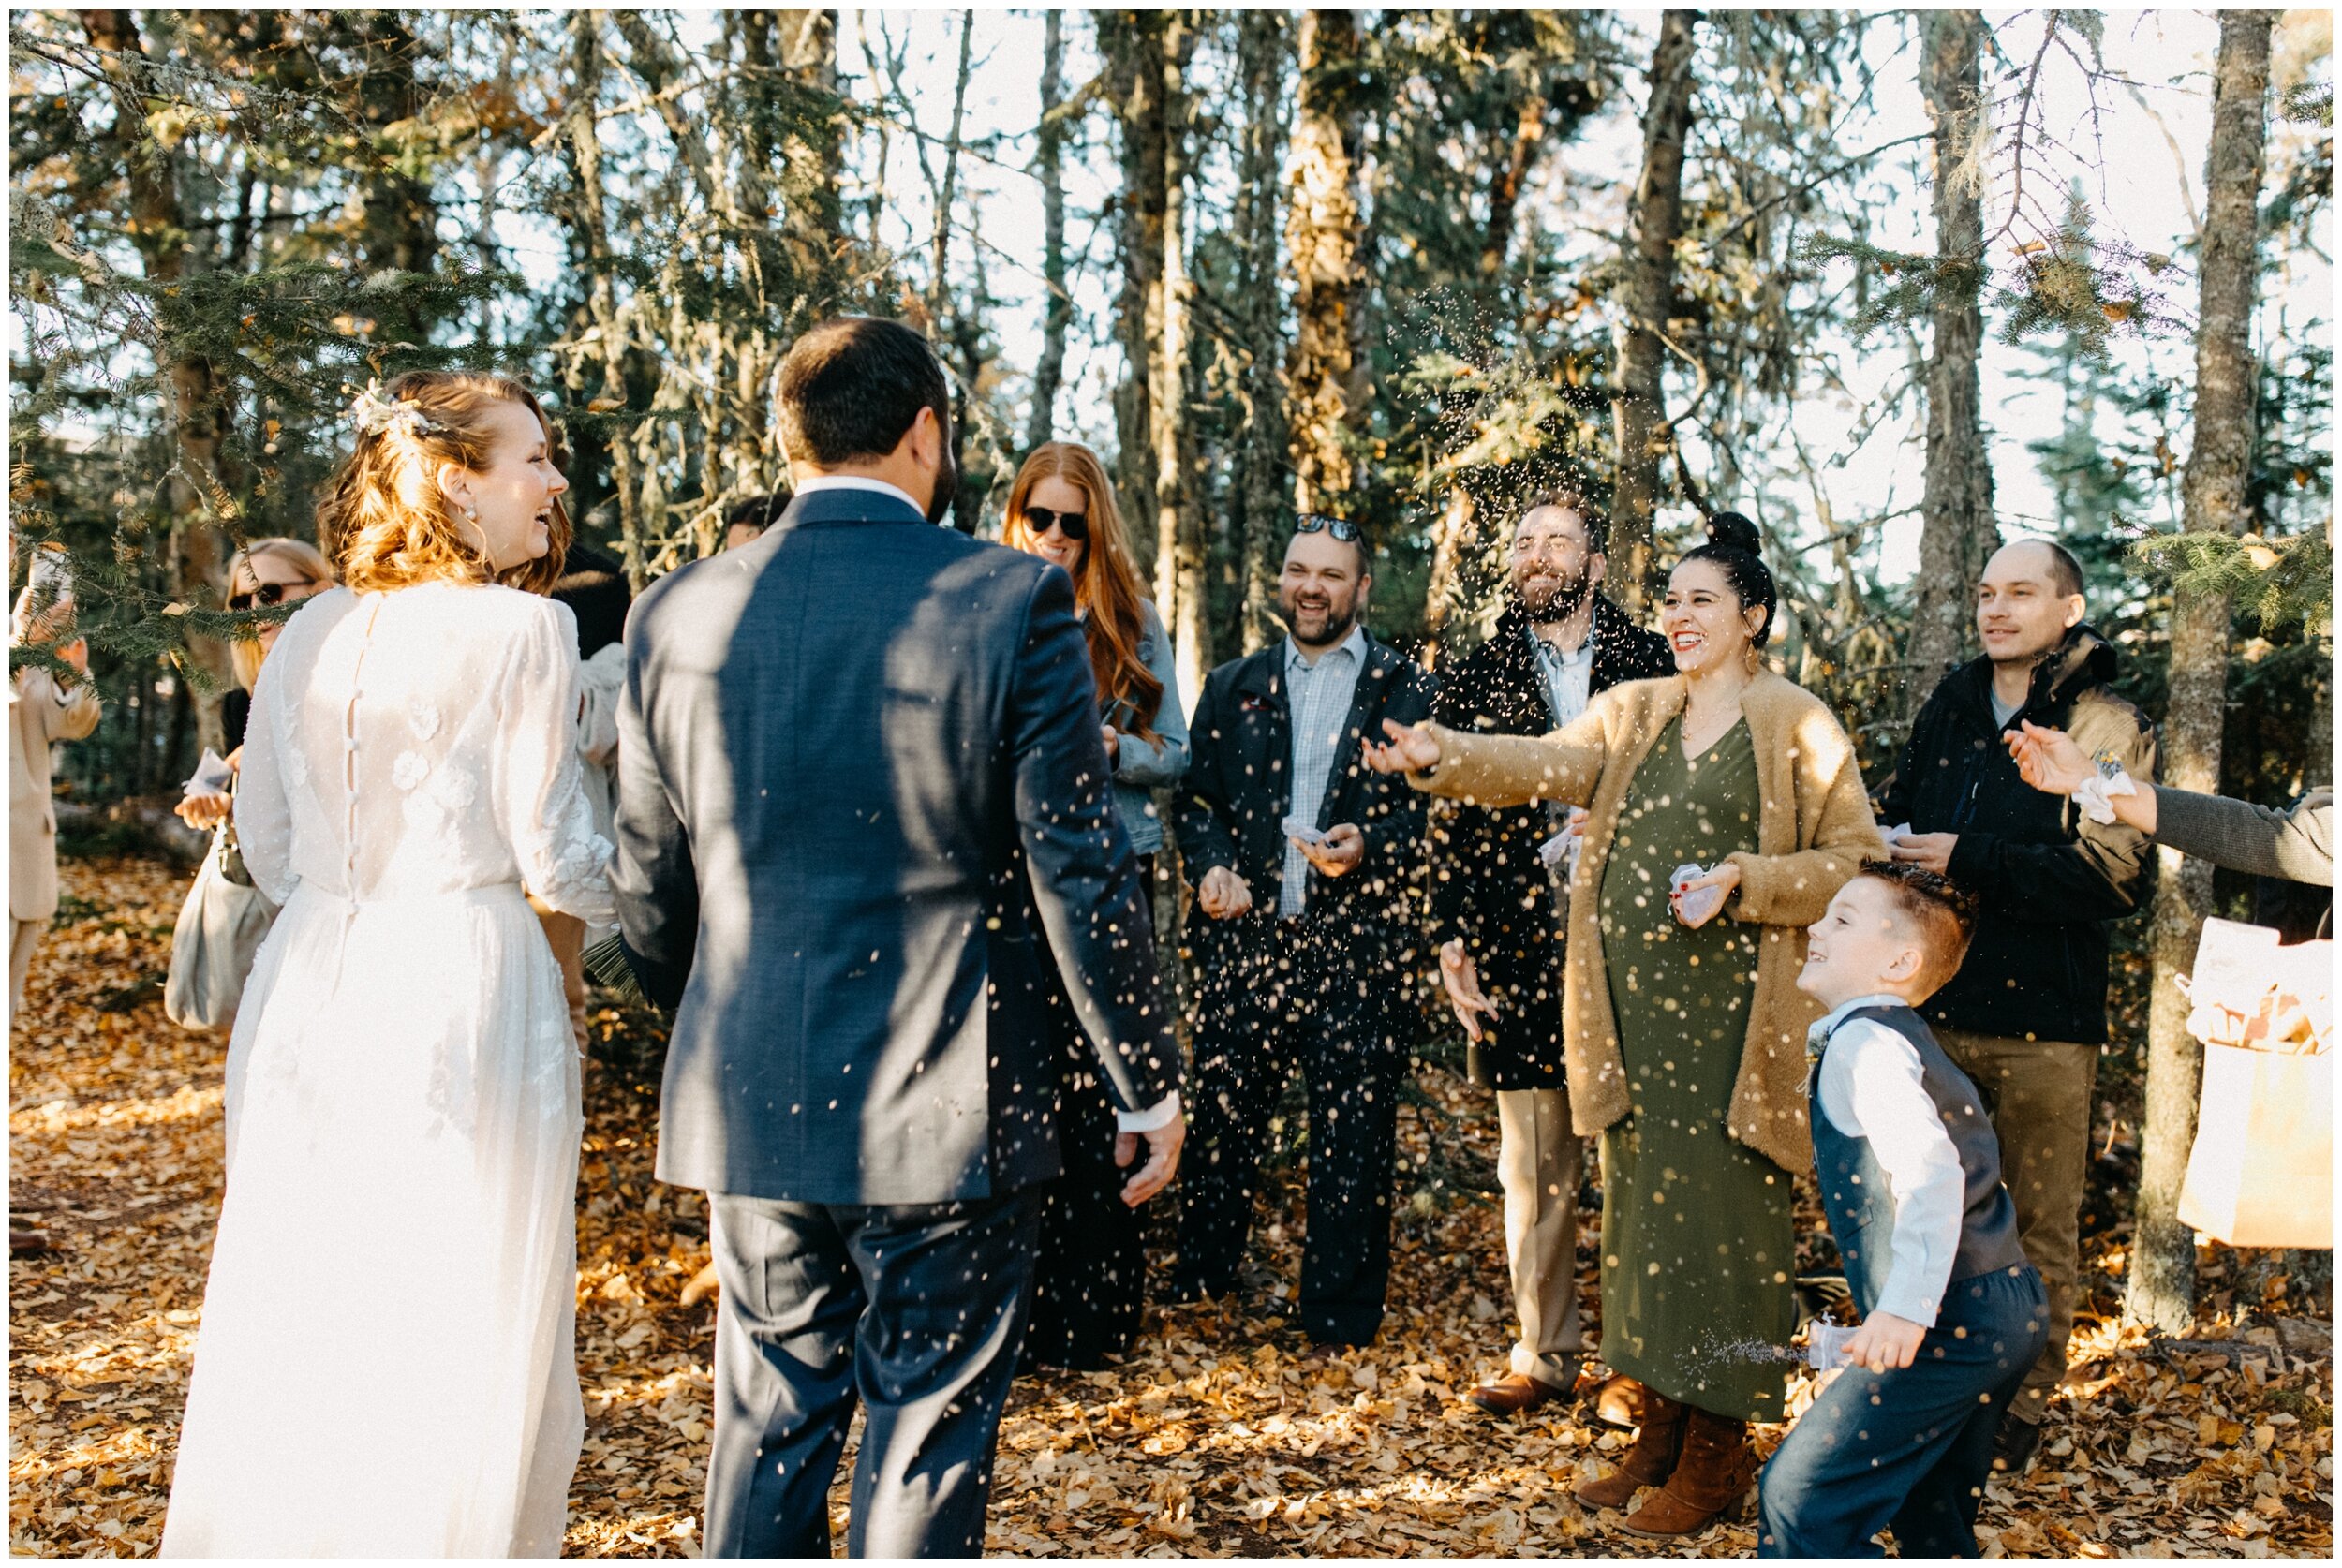 Wedding guests throwing lavender confetti at the bride and groom after intimate wedding ceremony in the woods